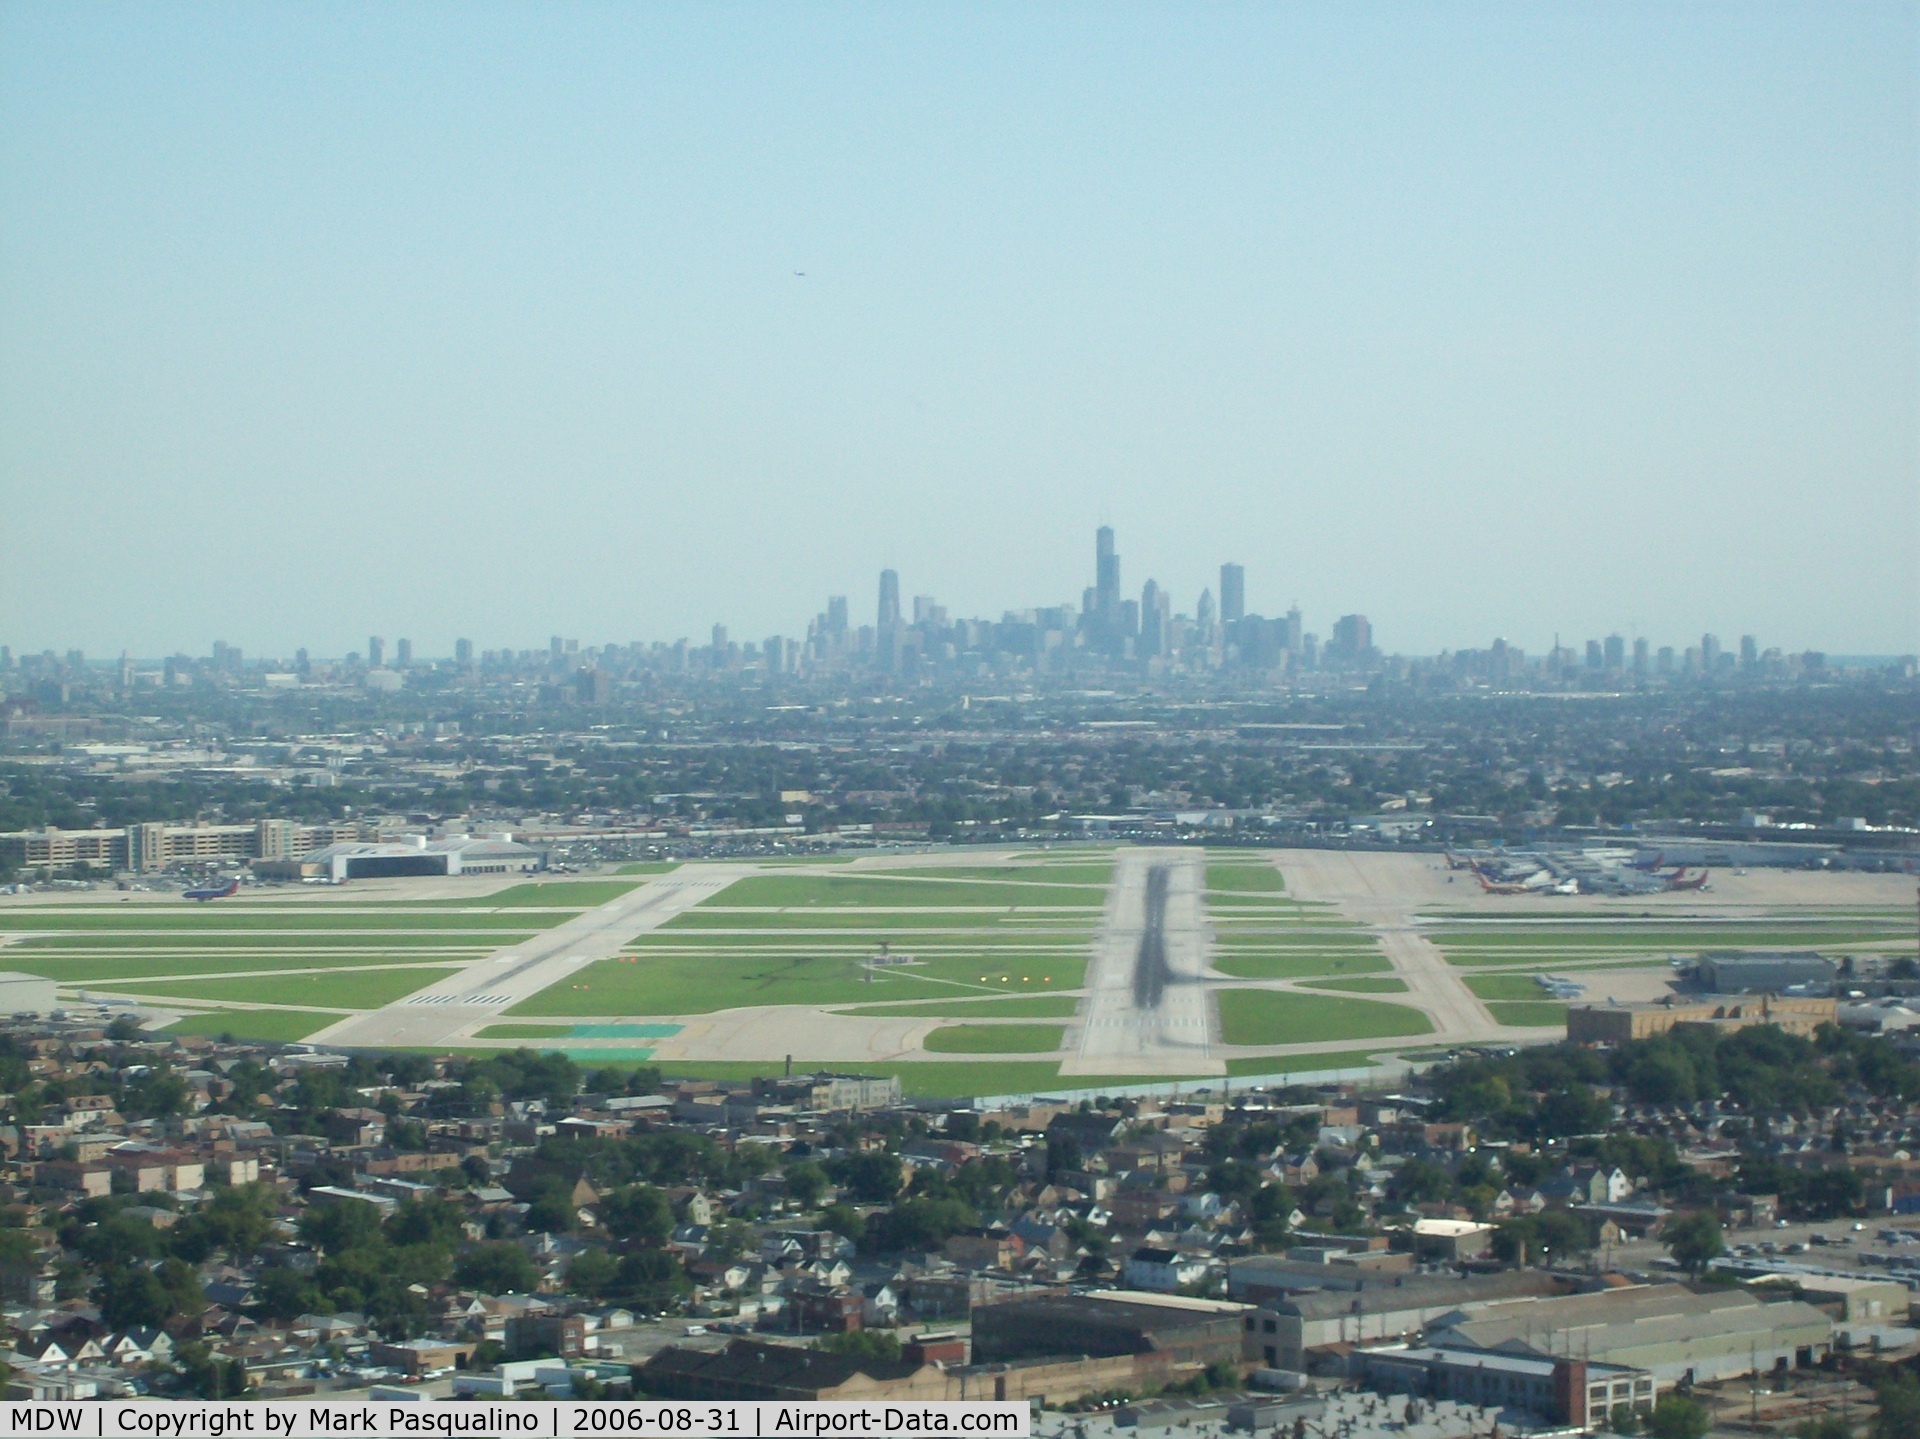 Chicago Midway International Airport (MDW) - Final approach Runway 4R